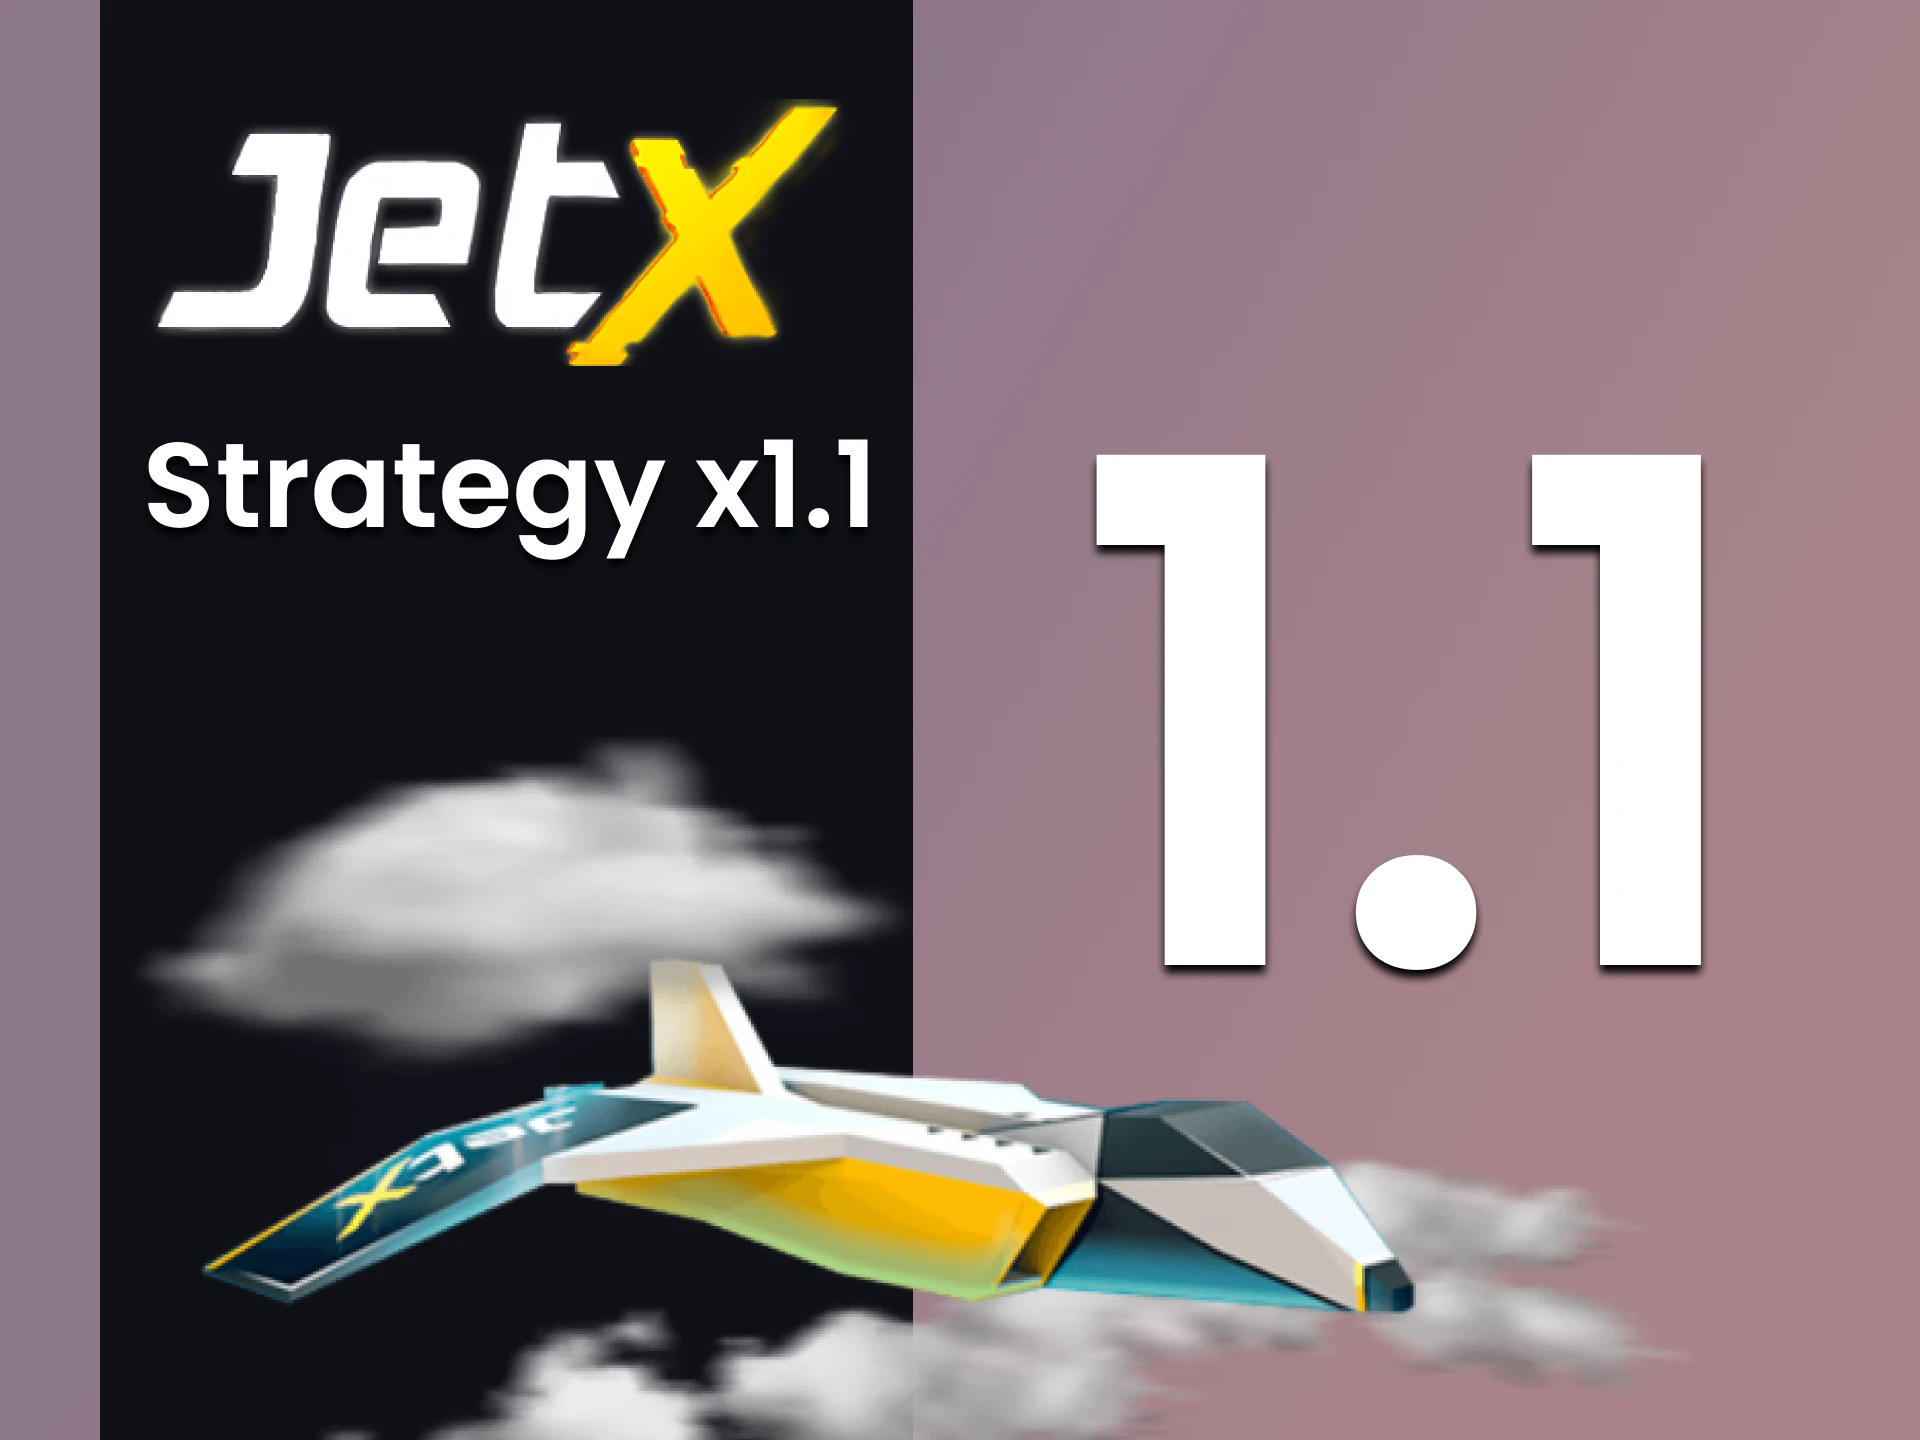 Use strategy 1.1 to win at JetX.